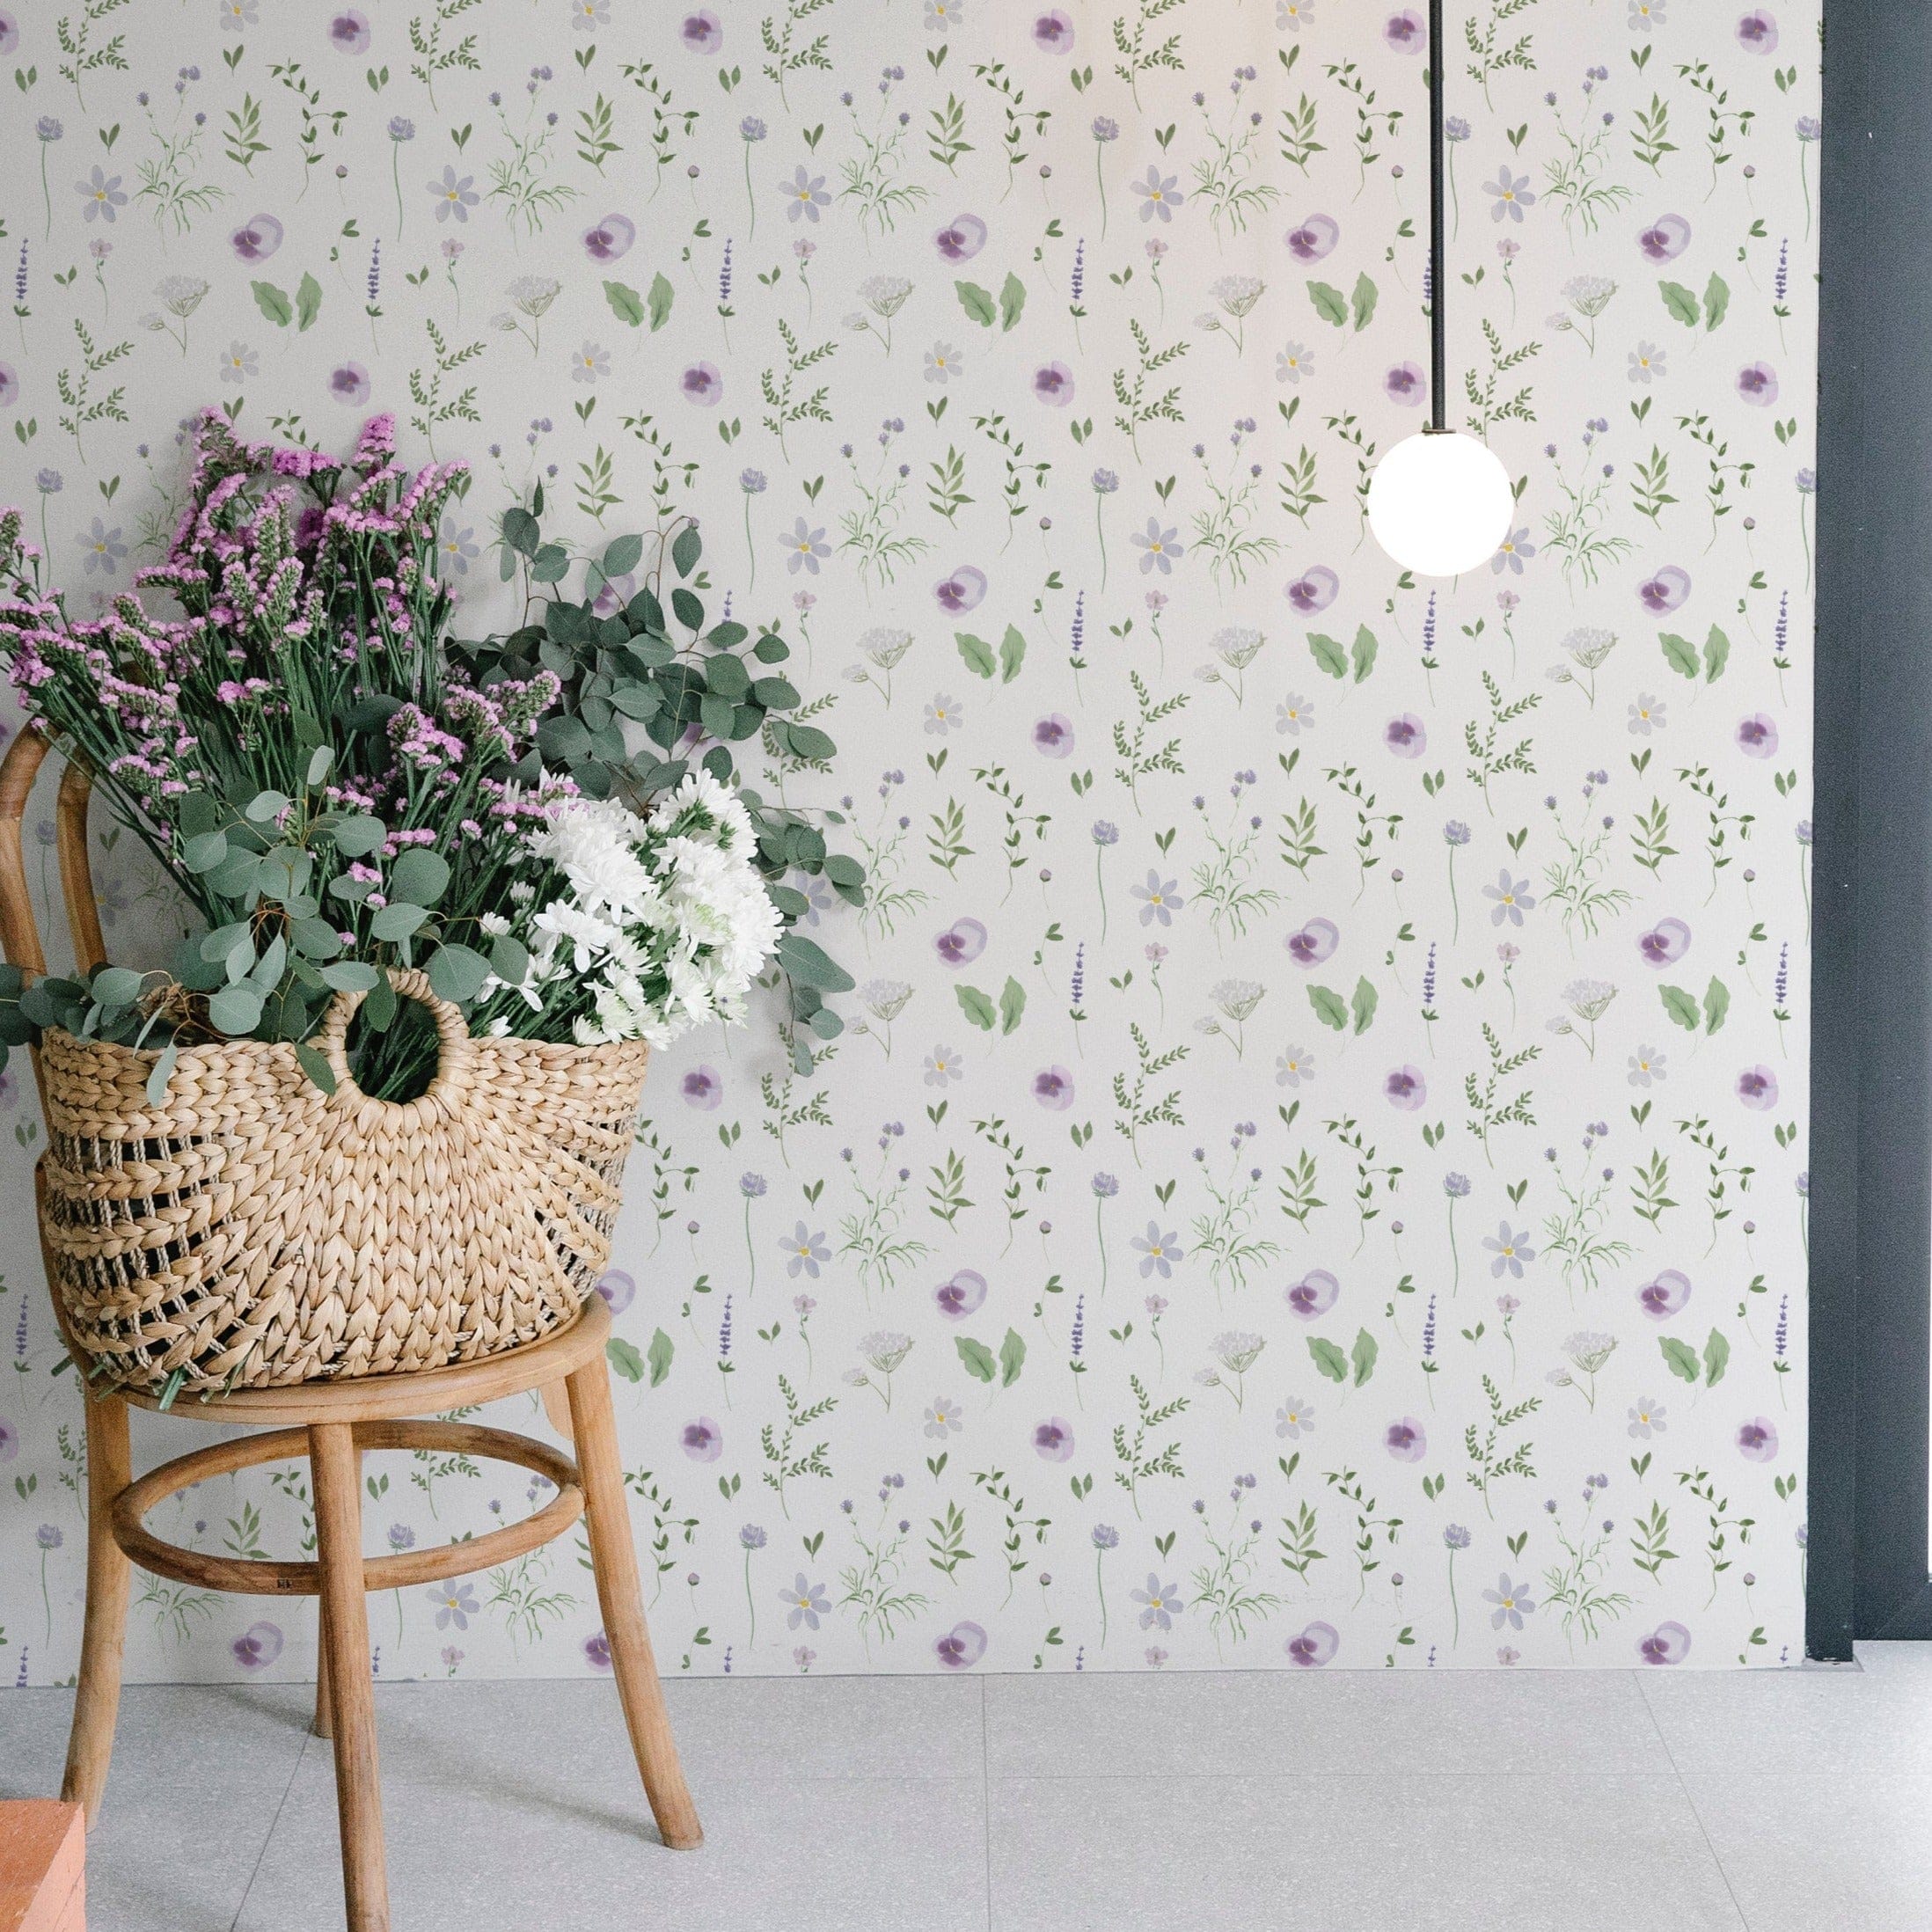 A corner of a room with the Wildflower Wonder Wallpaper, displaying its beautiful pattern of purple and yellow wildflowers. The decor features a woven basket filled with flowers and a hanging light